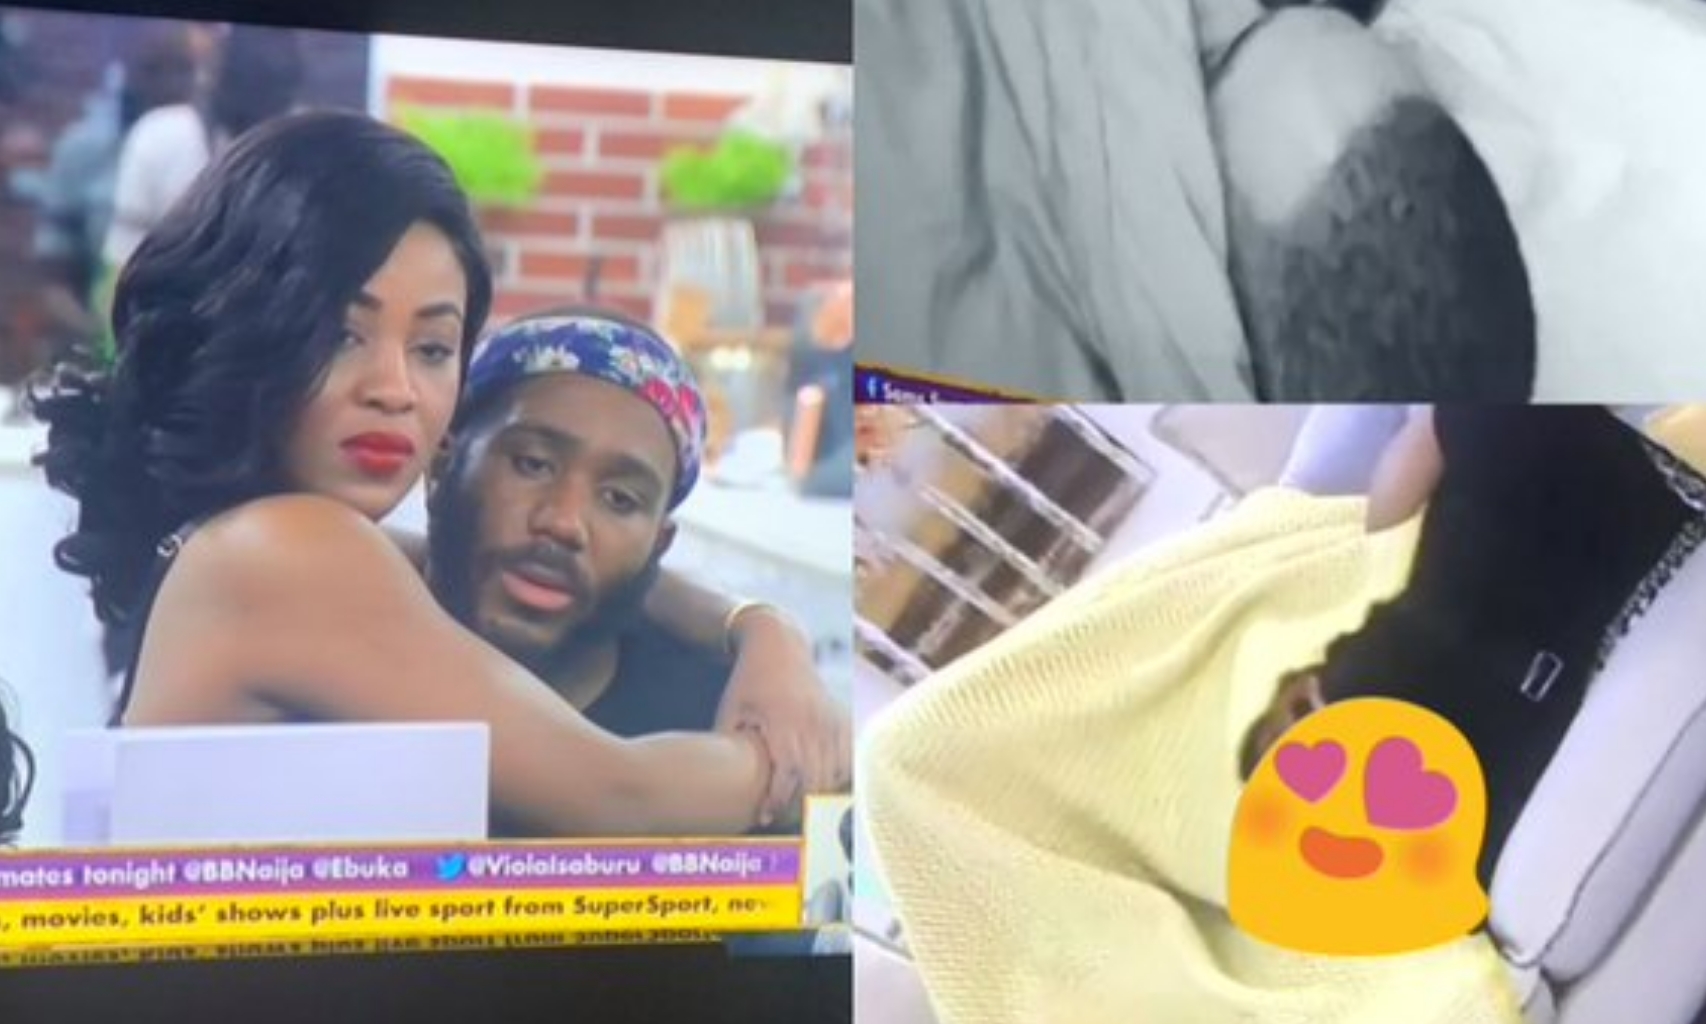 #BBNaija: Moment Erica exposed her bare butt as she enjoy steamy session with Kiddwaya (Video)